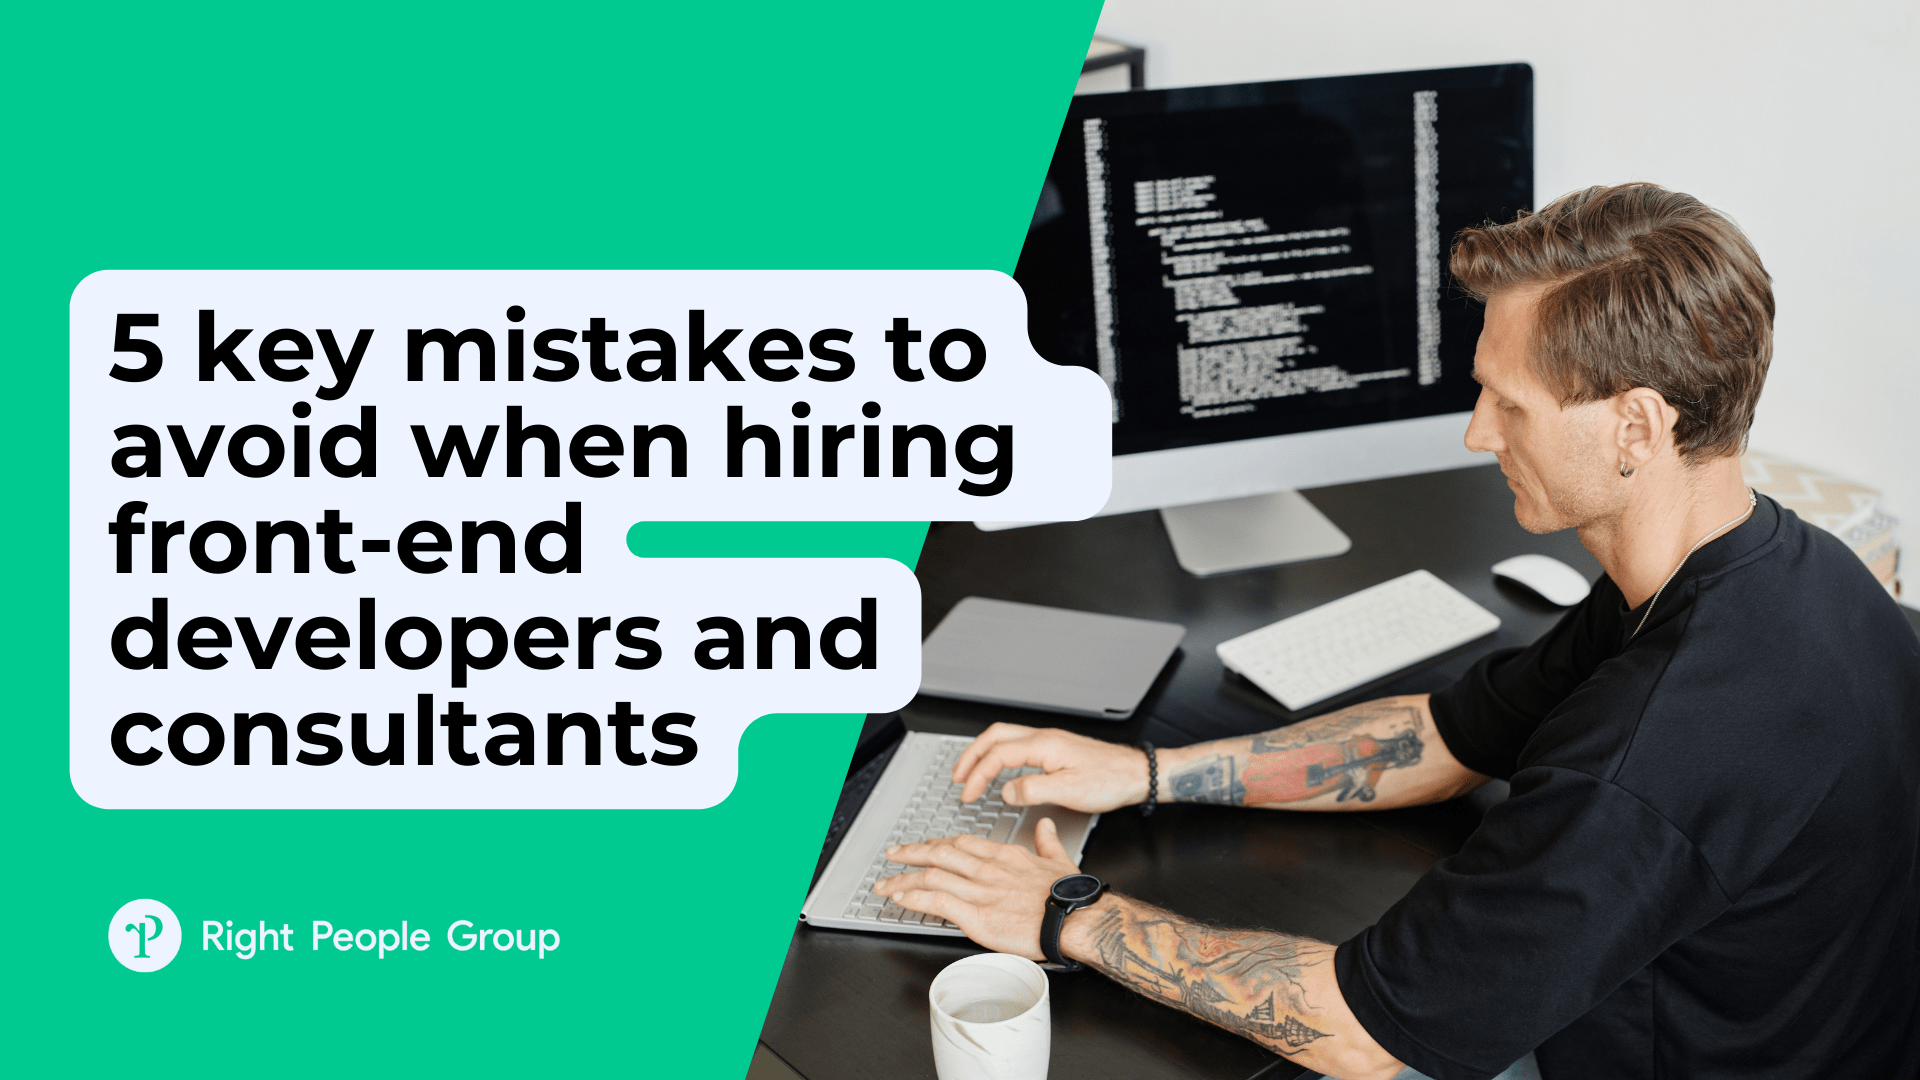 Key mistakes to avoid when hiring experienced front-end developers and consultants